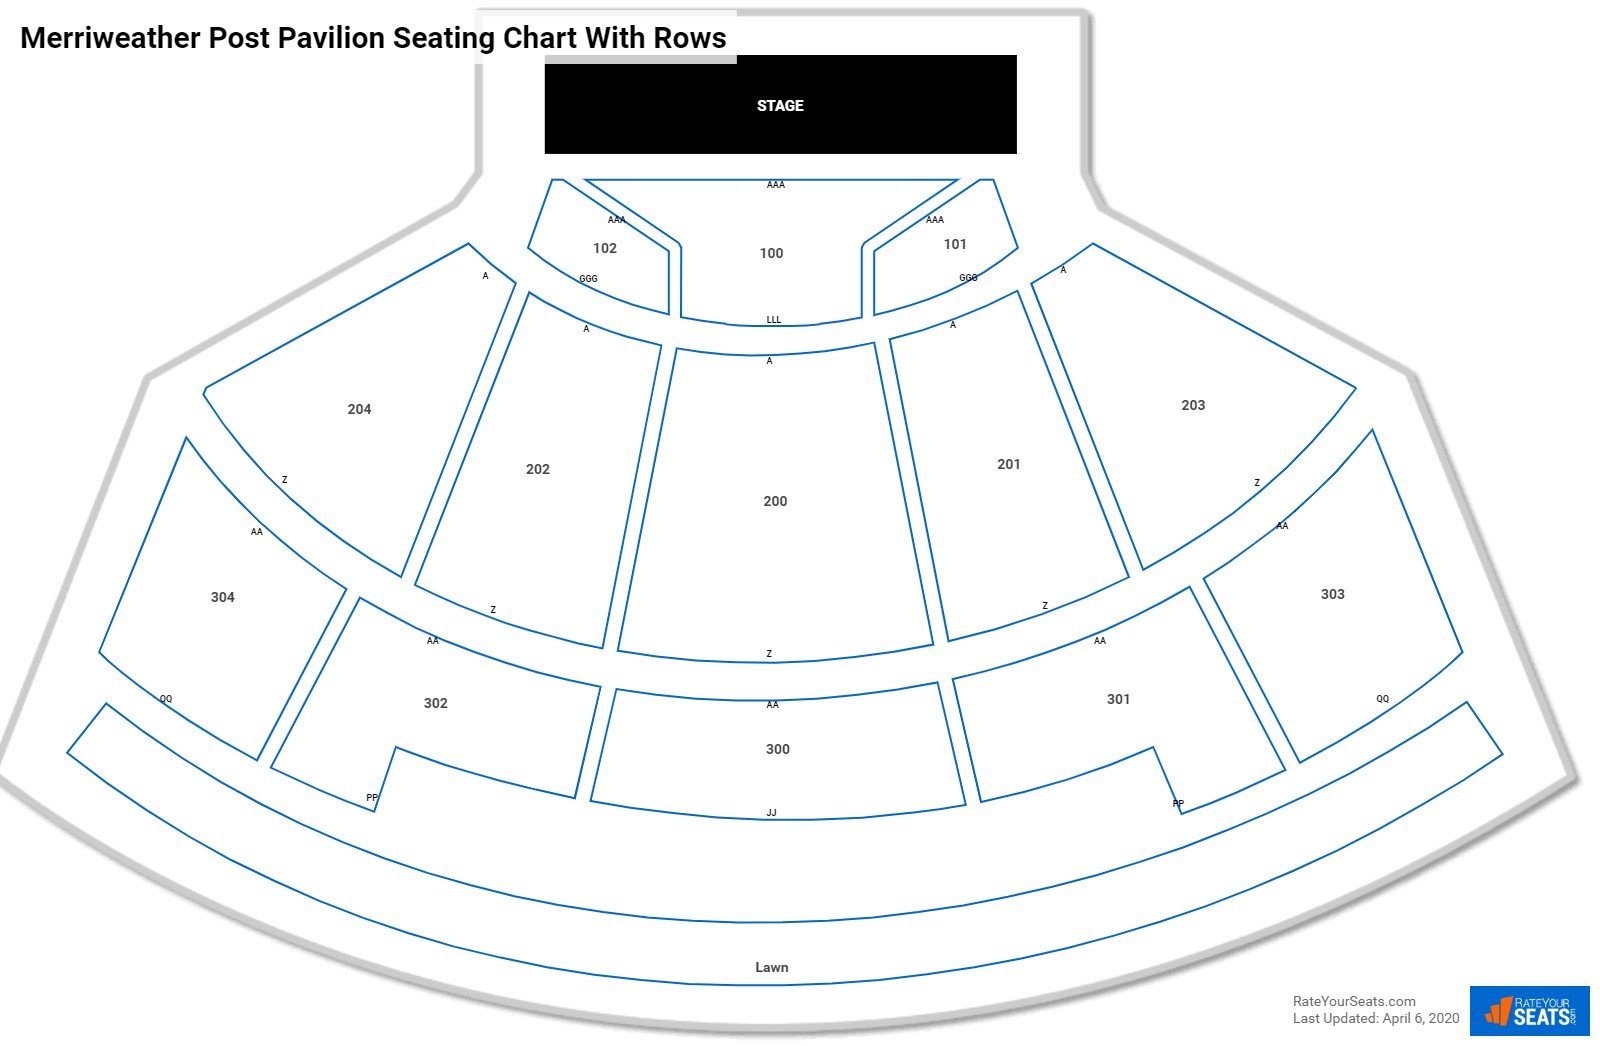 Merriweather Post Pavilion seating chart with row numbers